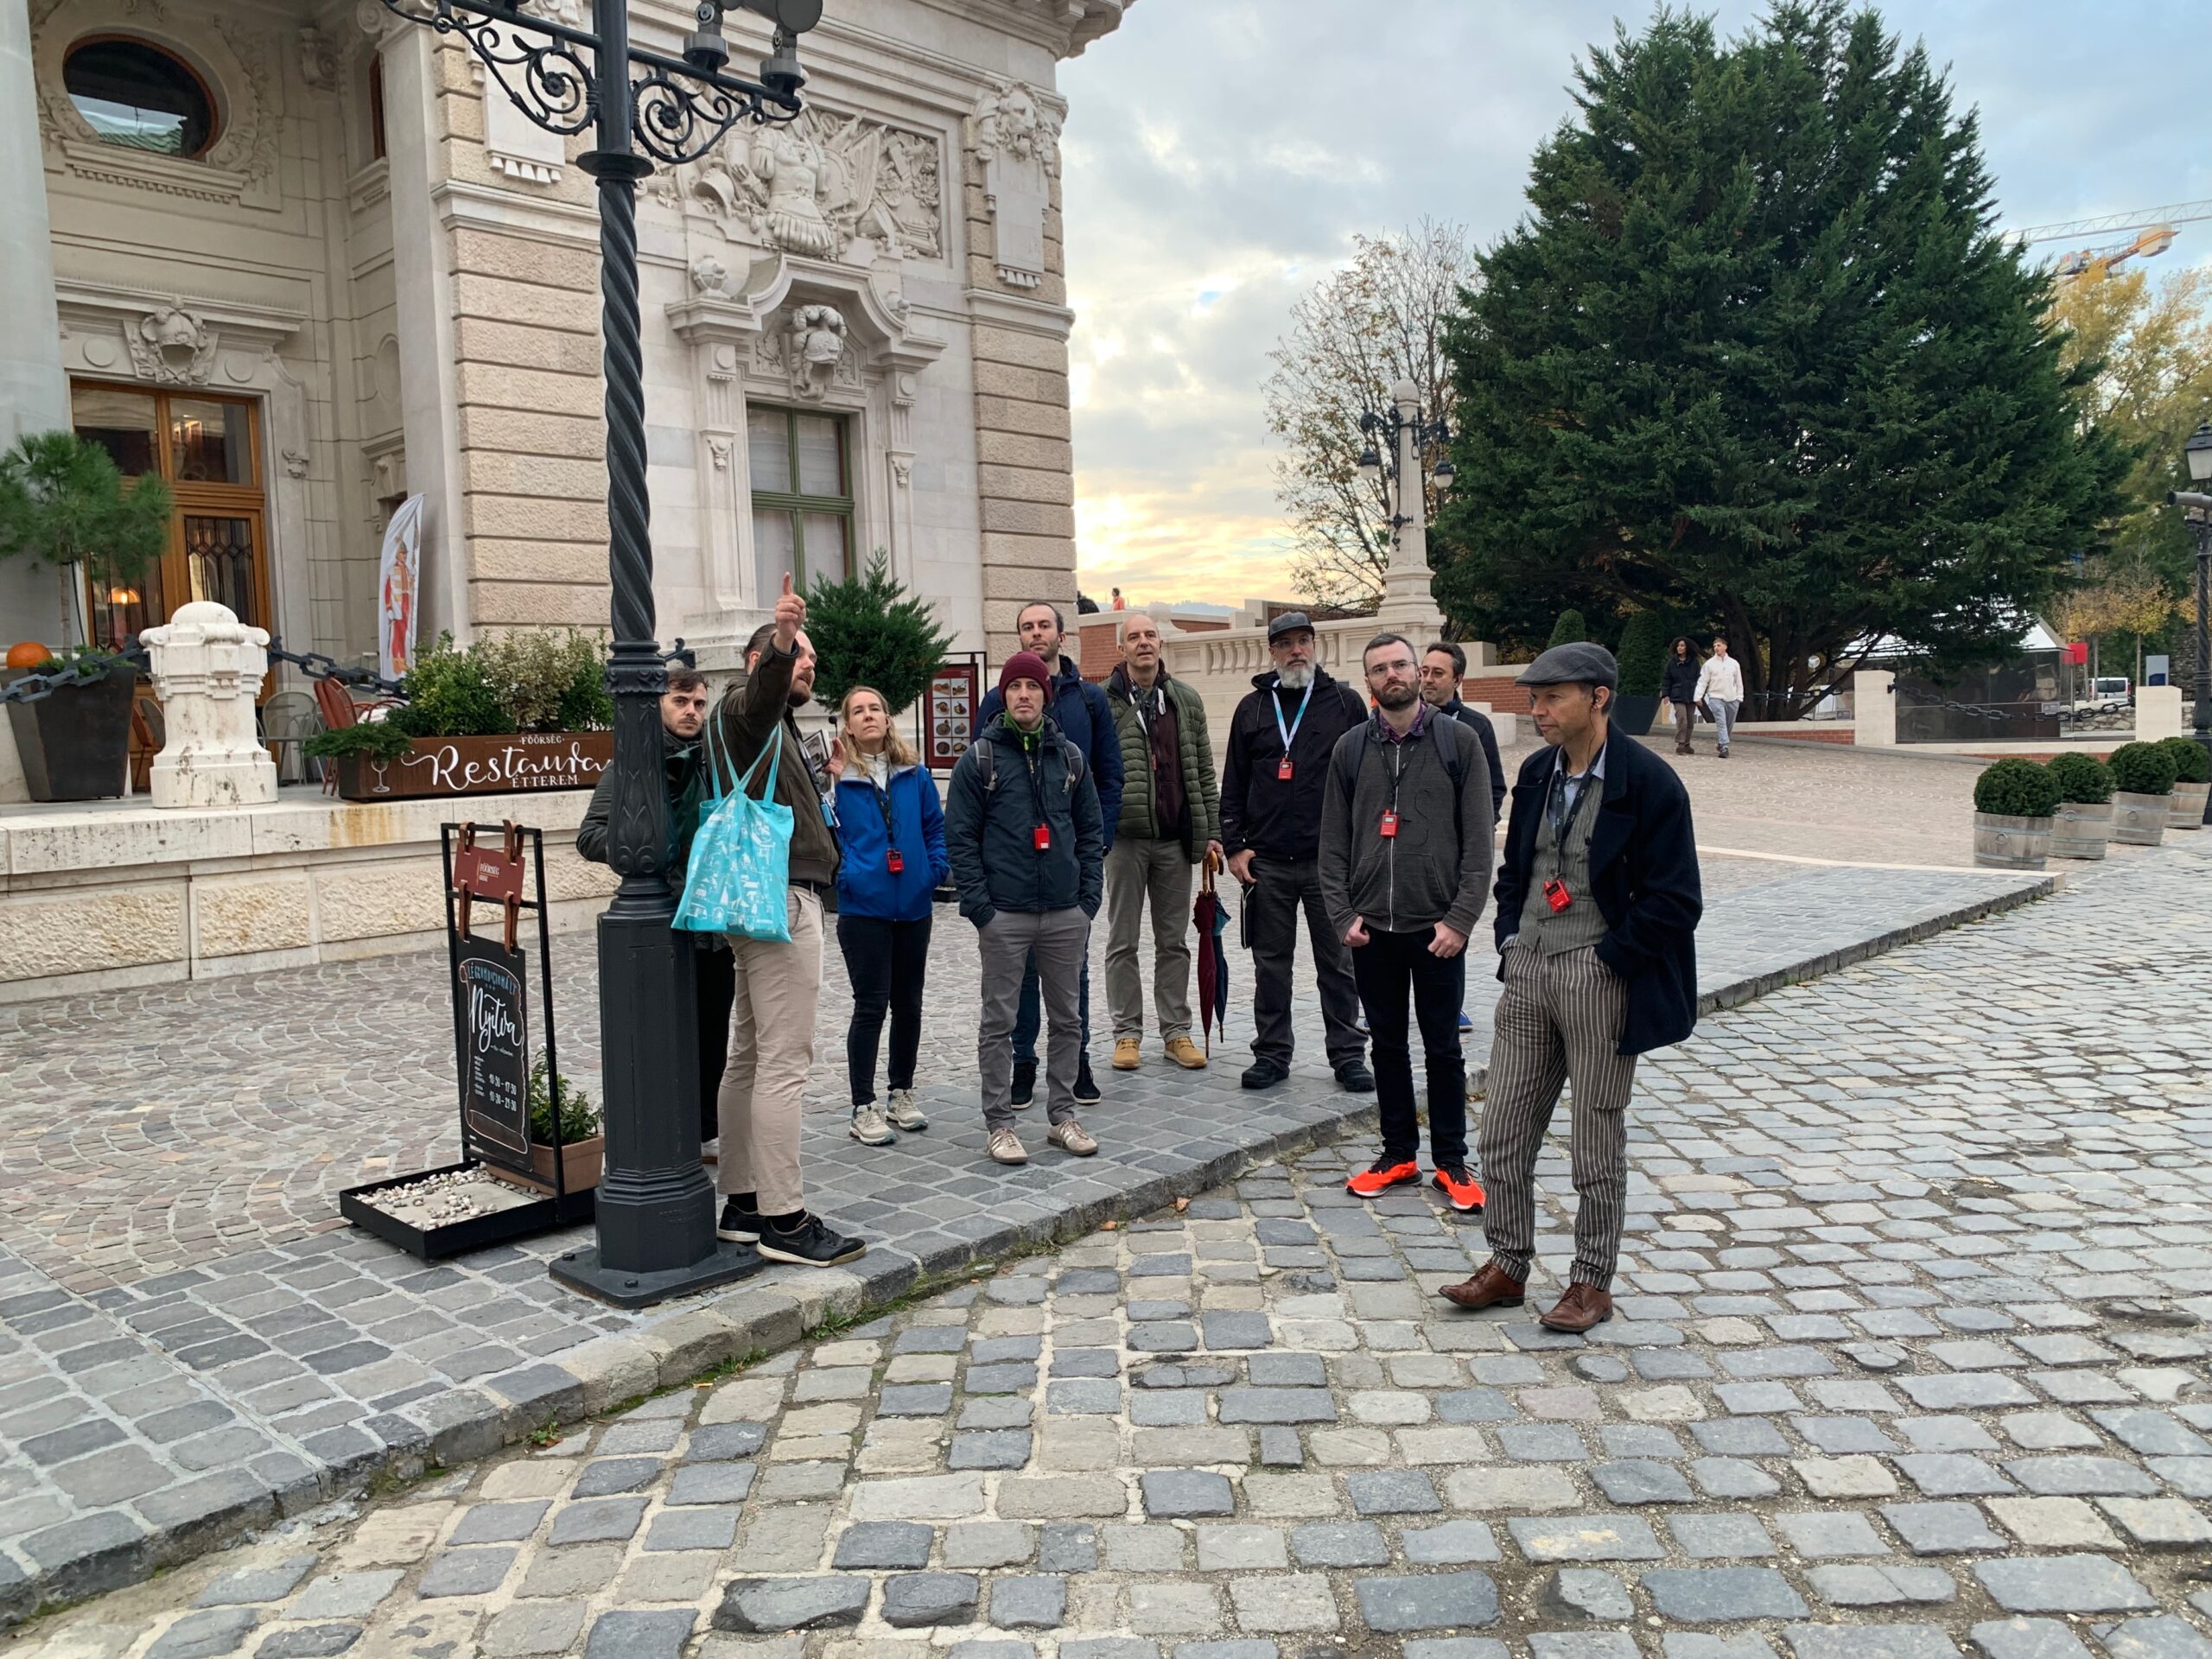 During the guided tour through the Buda Castle district